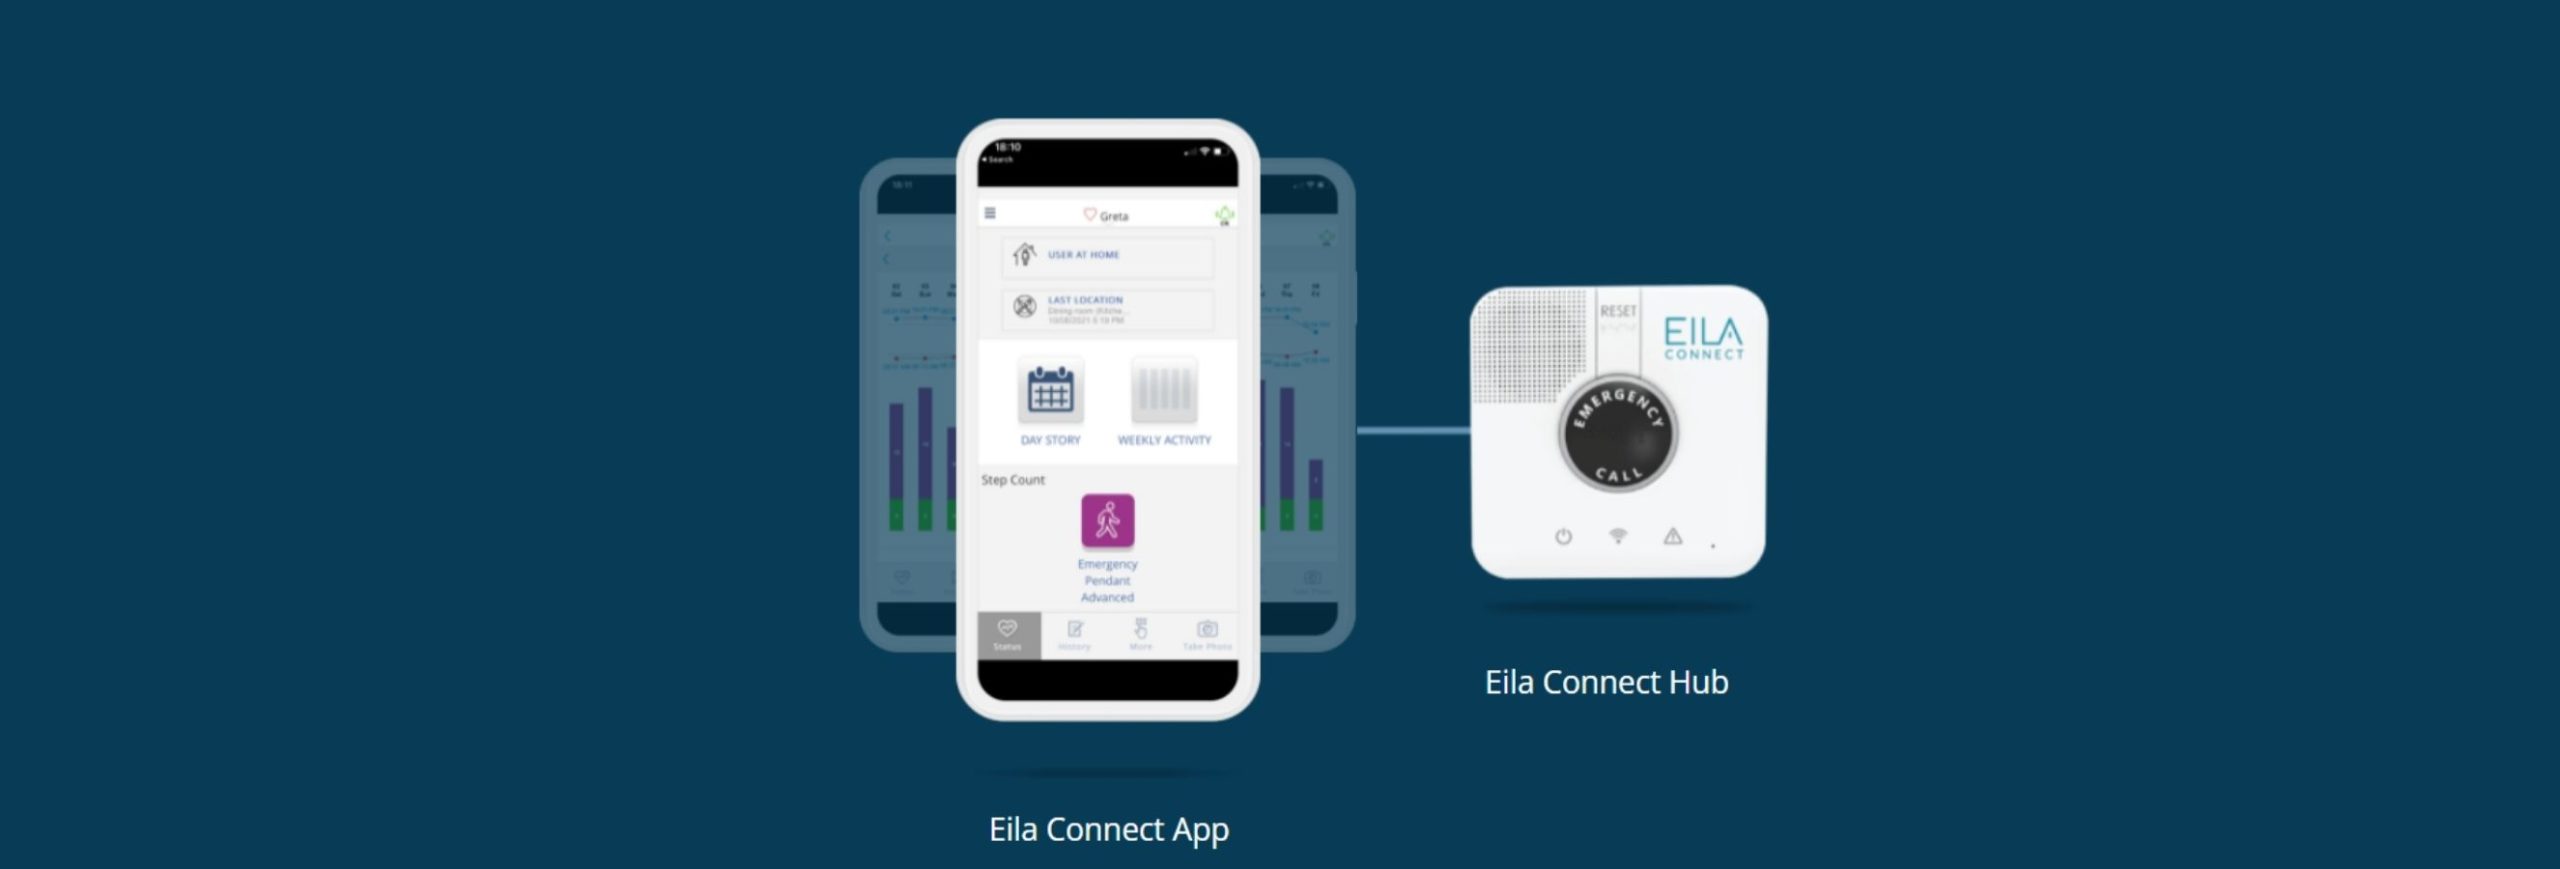 Eila Connect, empowering seniors to live independently for longer